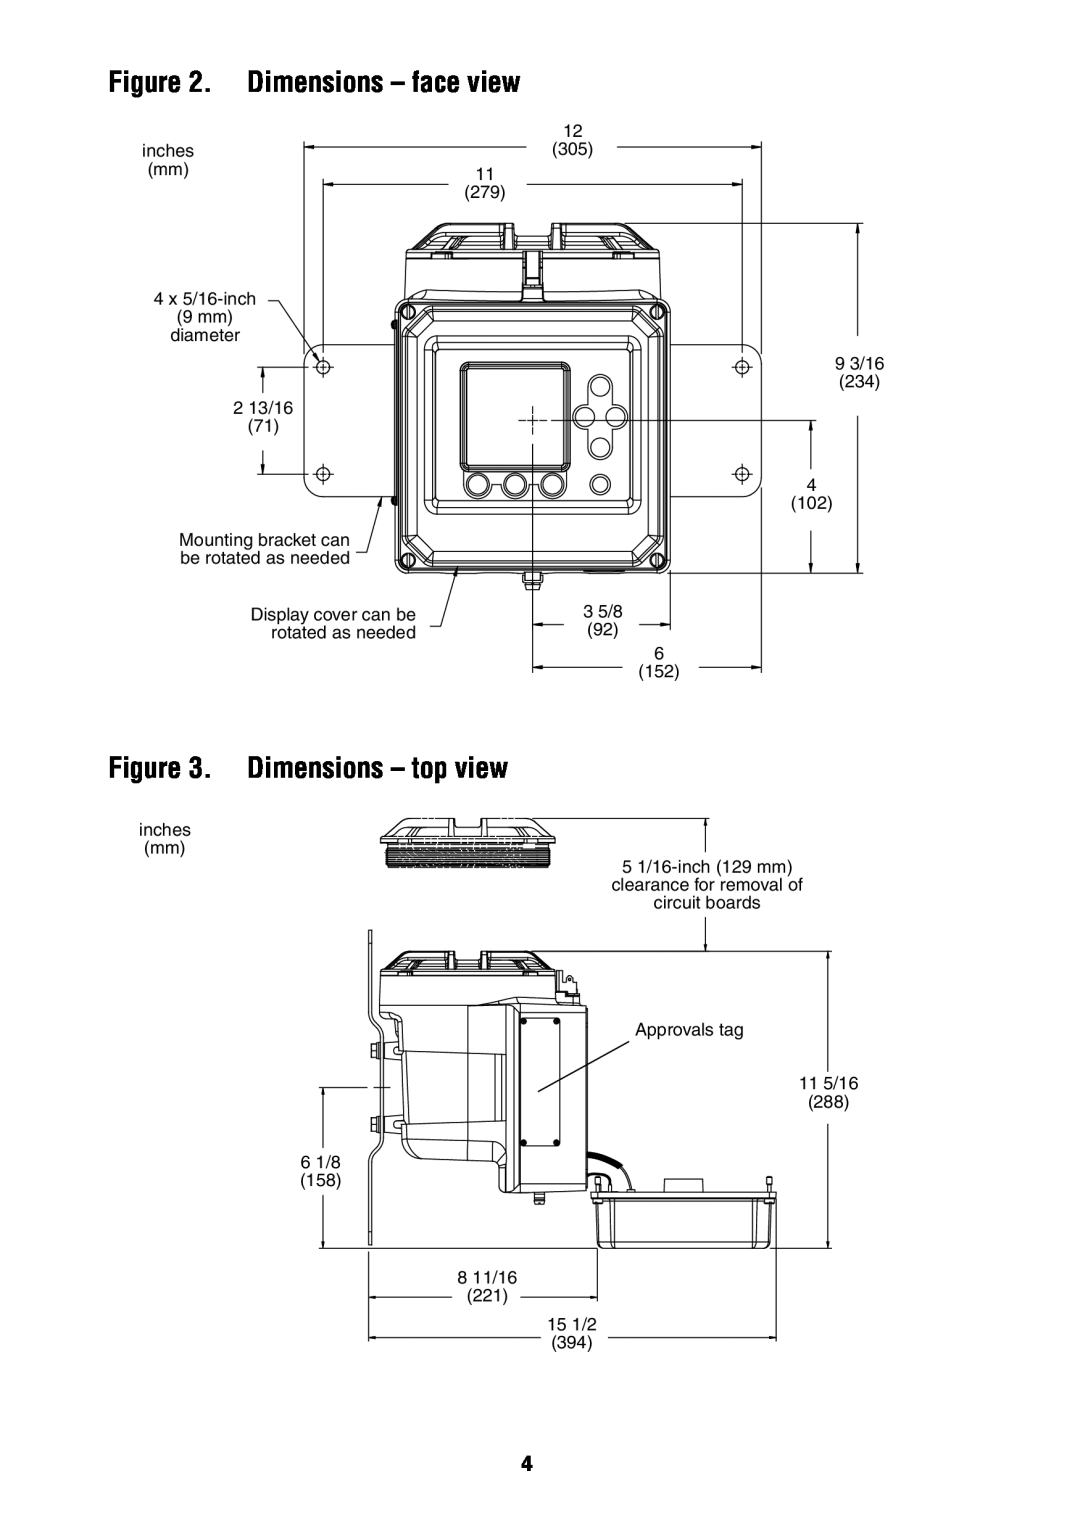 Emerson 3350, 3700 installation instructions Dimensions - face view, Dimensions - top view 